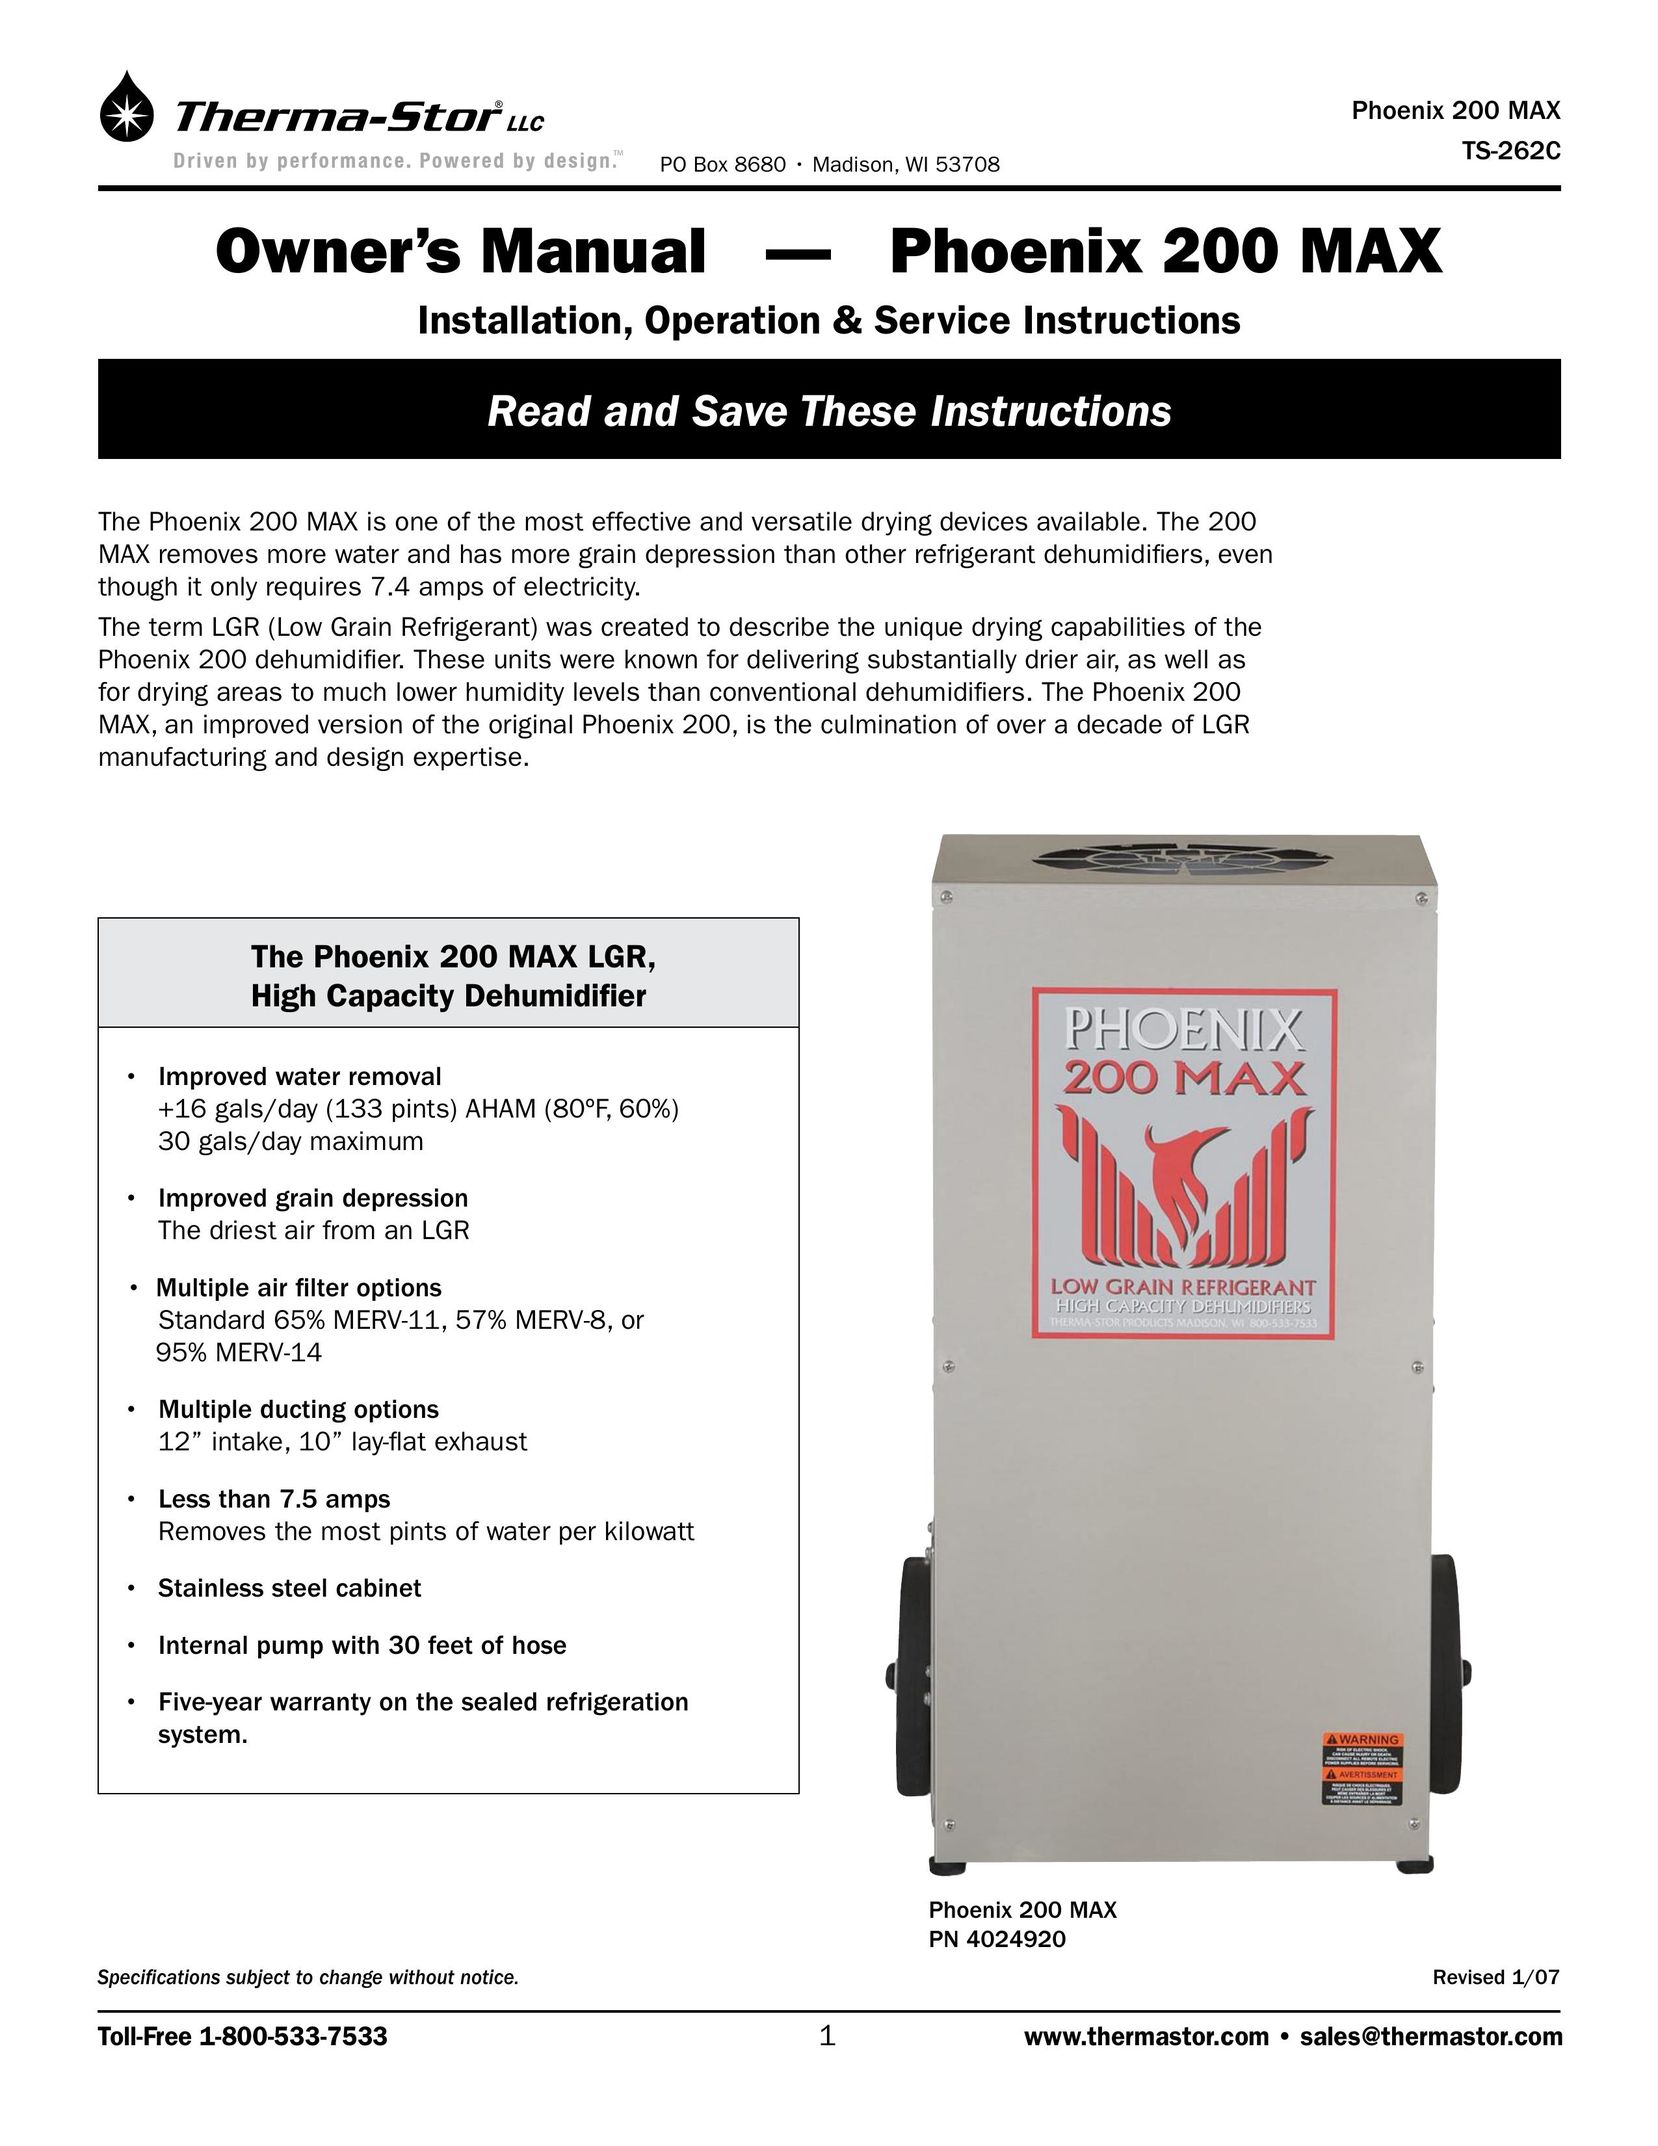 Therma-Stor Products Group 200 MAX Dehumidifier User Manual